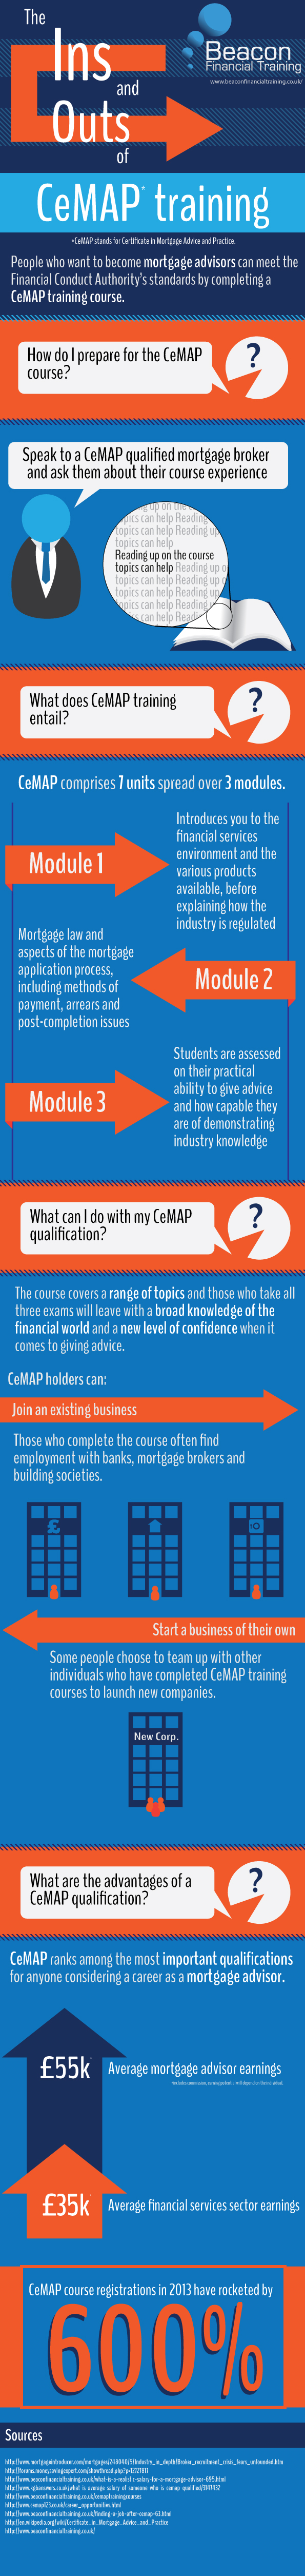 CeMAP Training Infographic